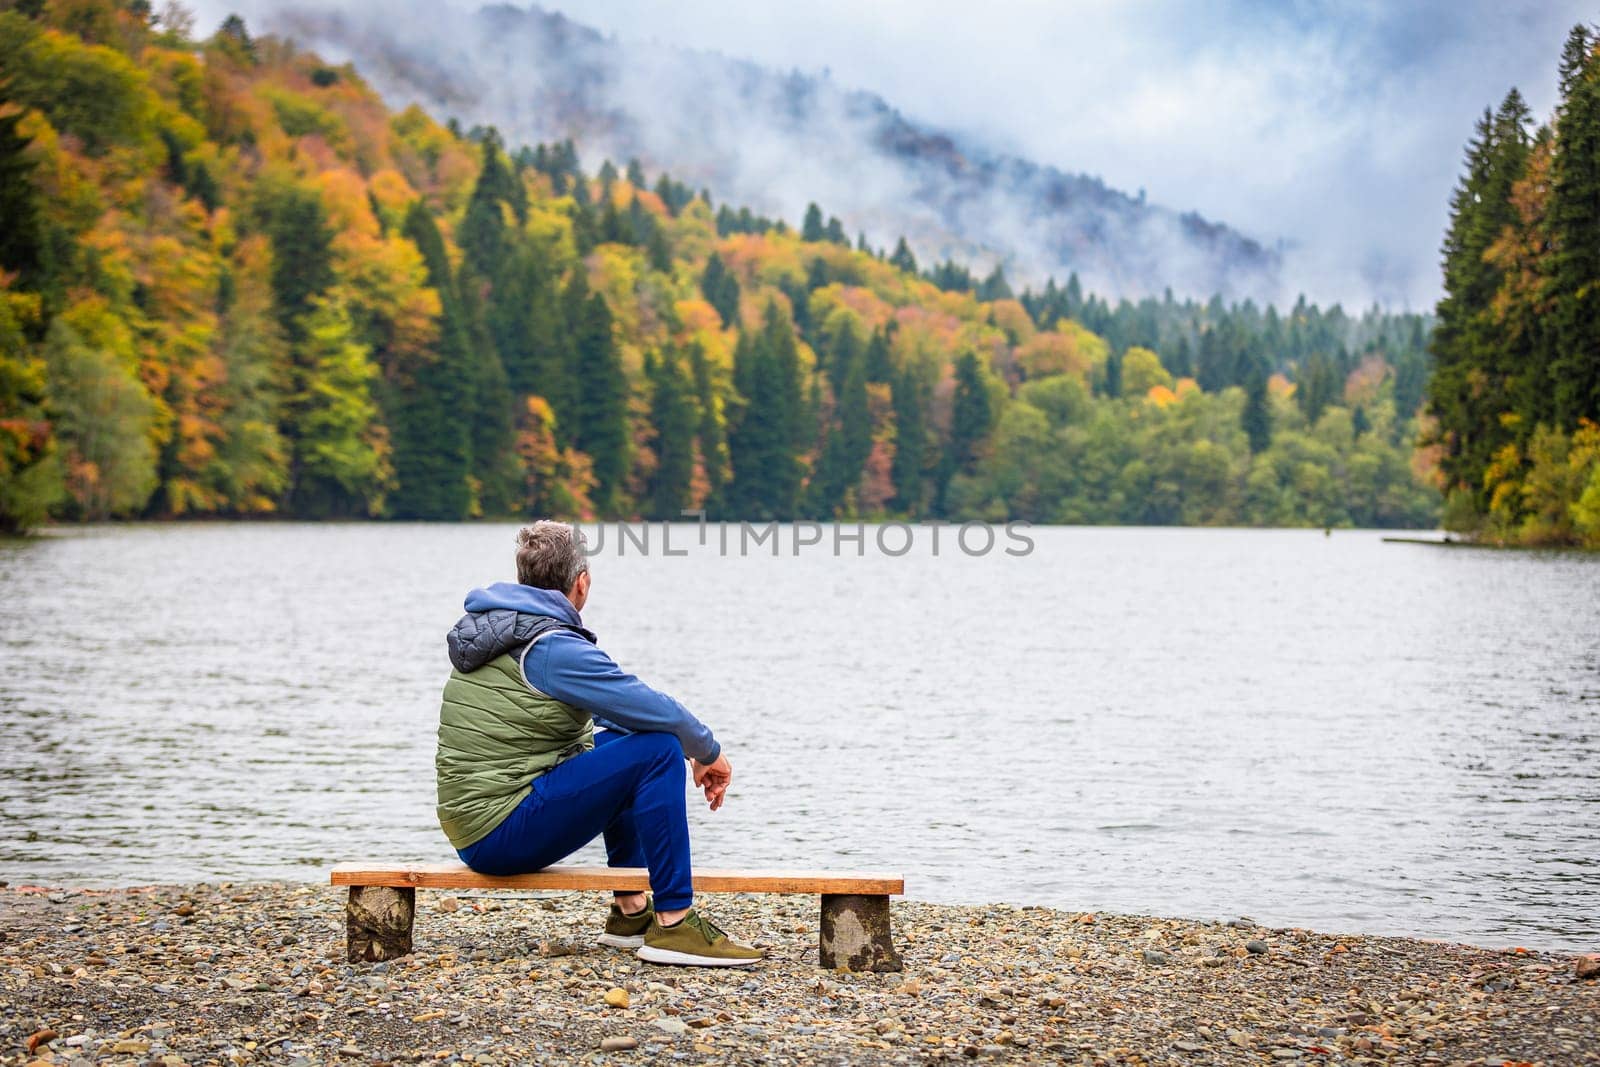 A man is delighted with a picturesque lake in the mountains, surrounded by beautiful natural landscapes.